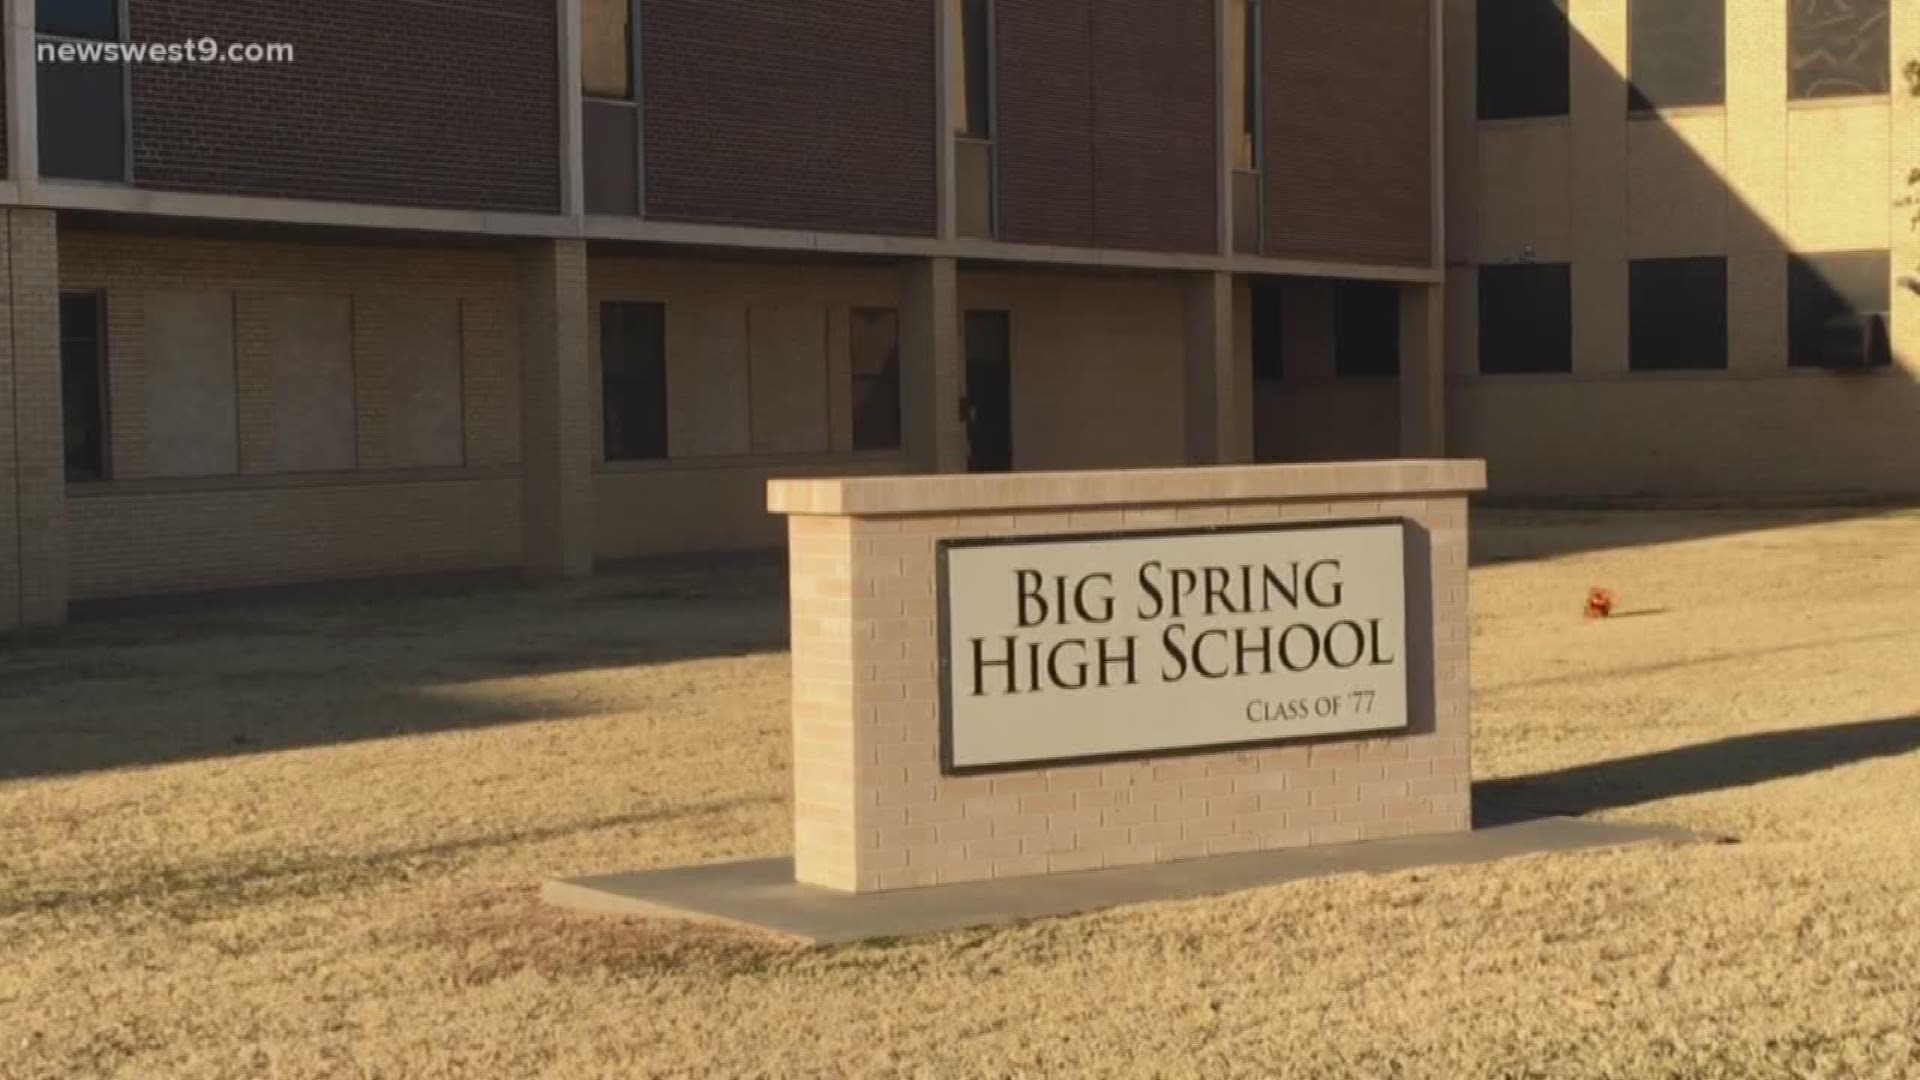 Big Spring ISD says students and staff were immediately evacuated.